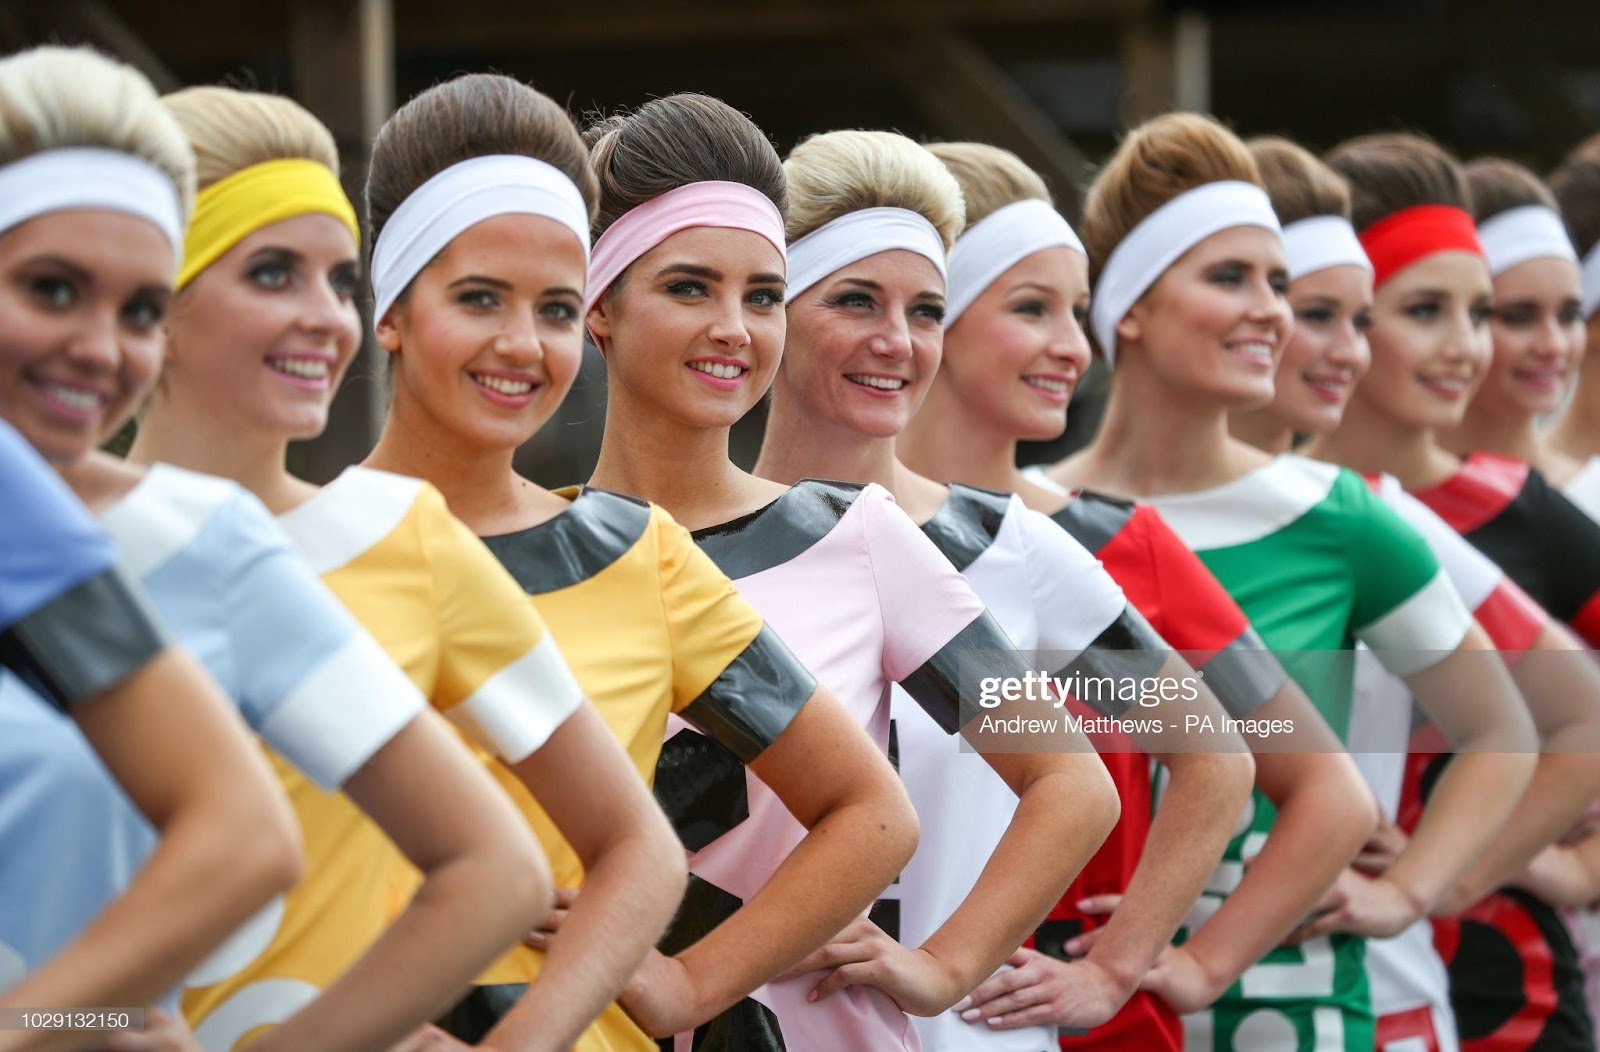 D:\Documenti\posts\posts\Women and motorsport\foto\Getty e altre\grid-girls-pose-for-a-photograph-in-the-paddock-on-day-two-of-the-picture-id1029132150.jpg